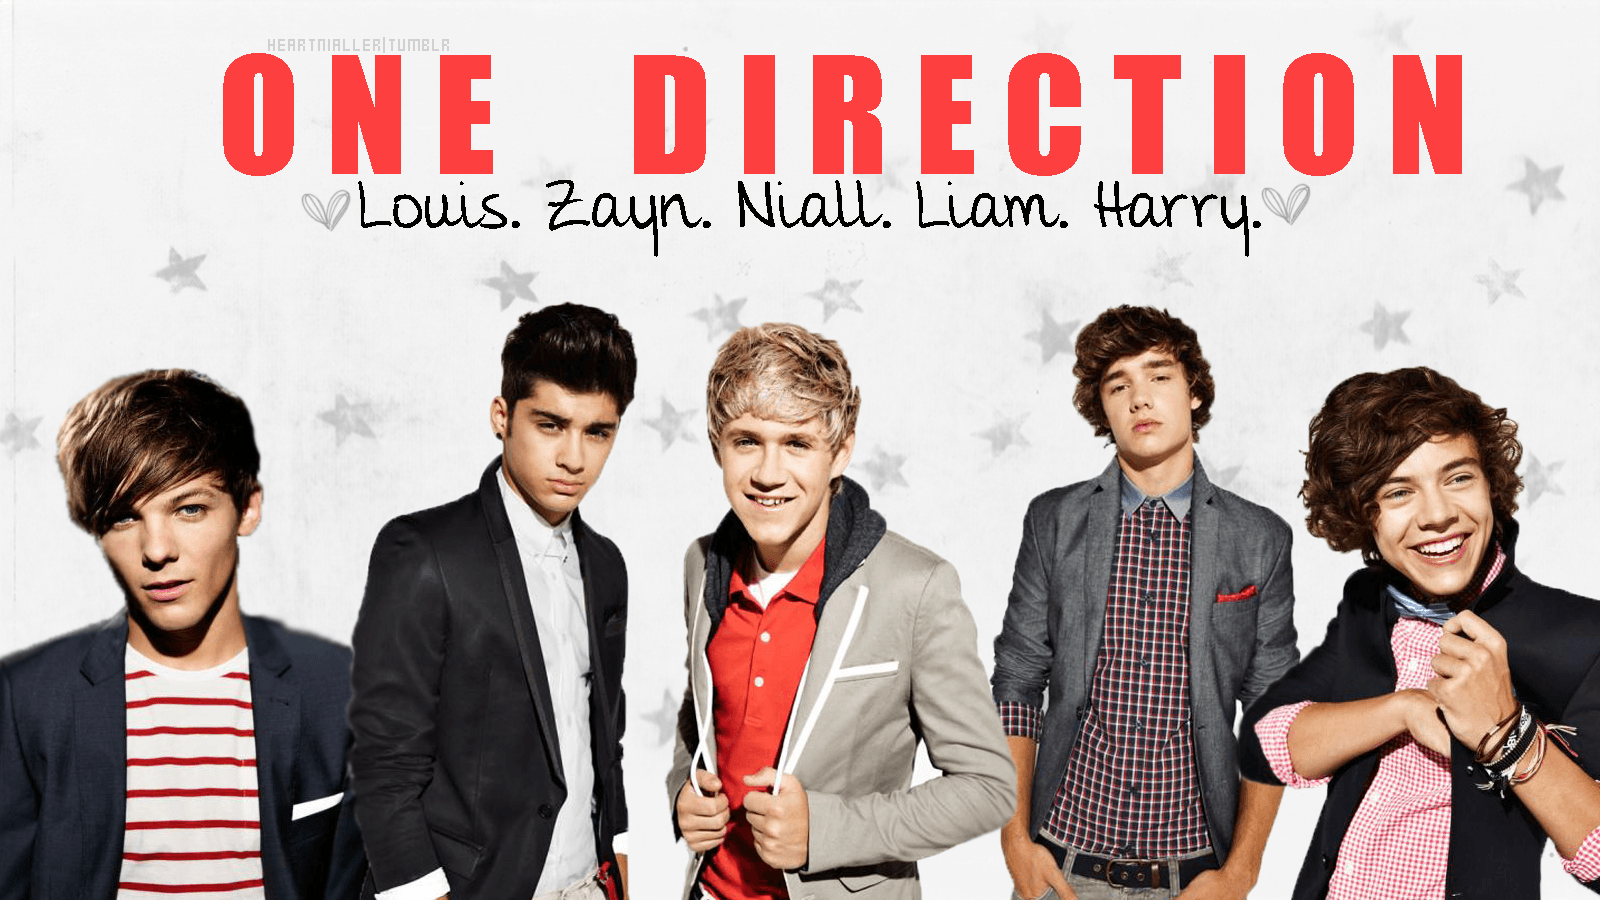 One Direction HD Wallpaper For Pc Background. Slide Background Edit